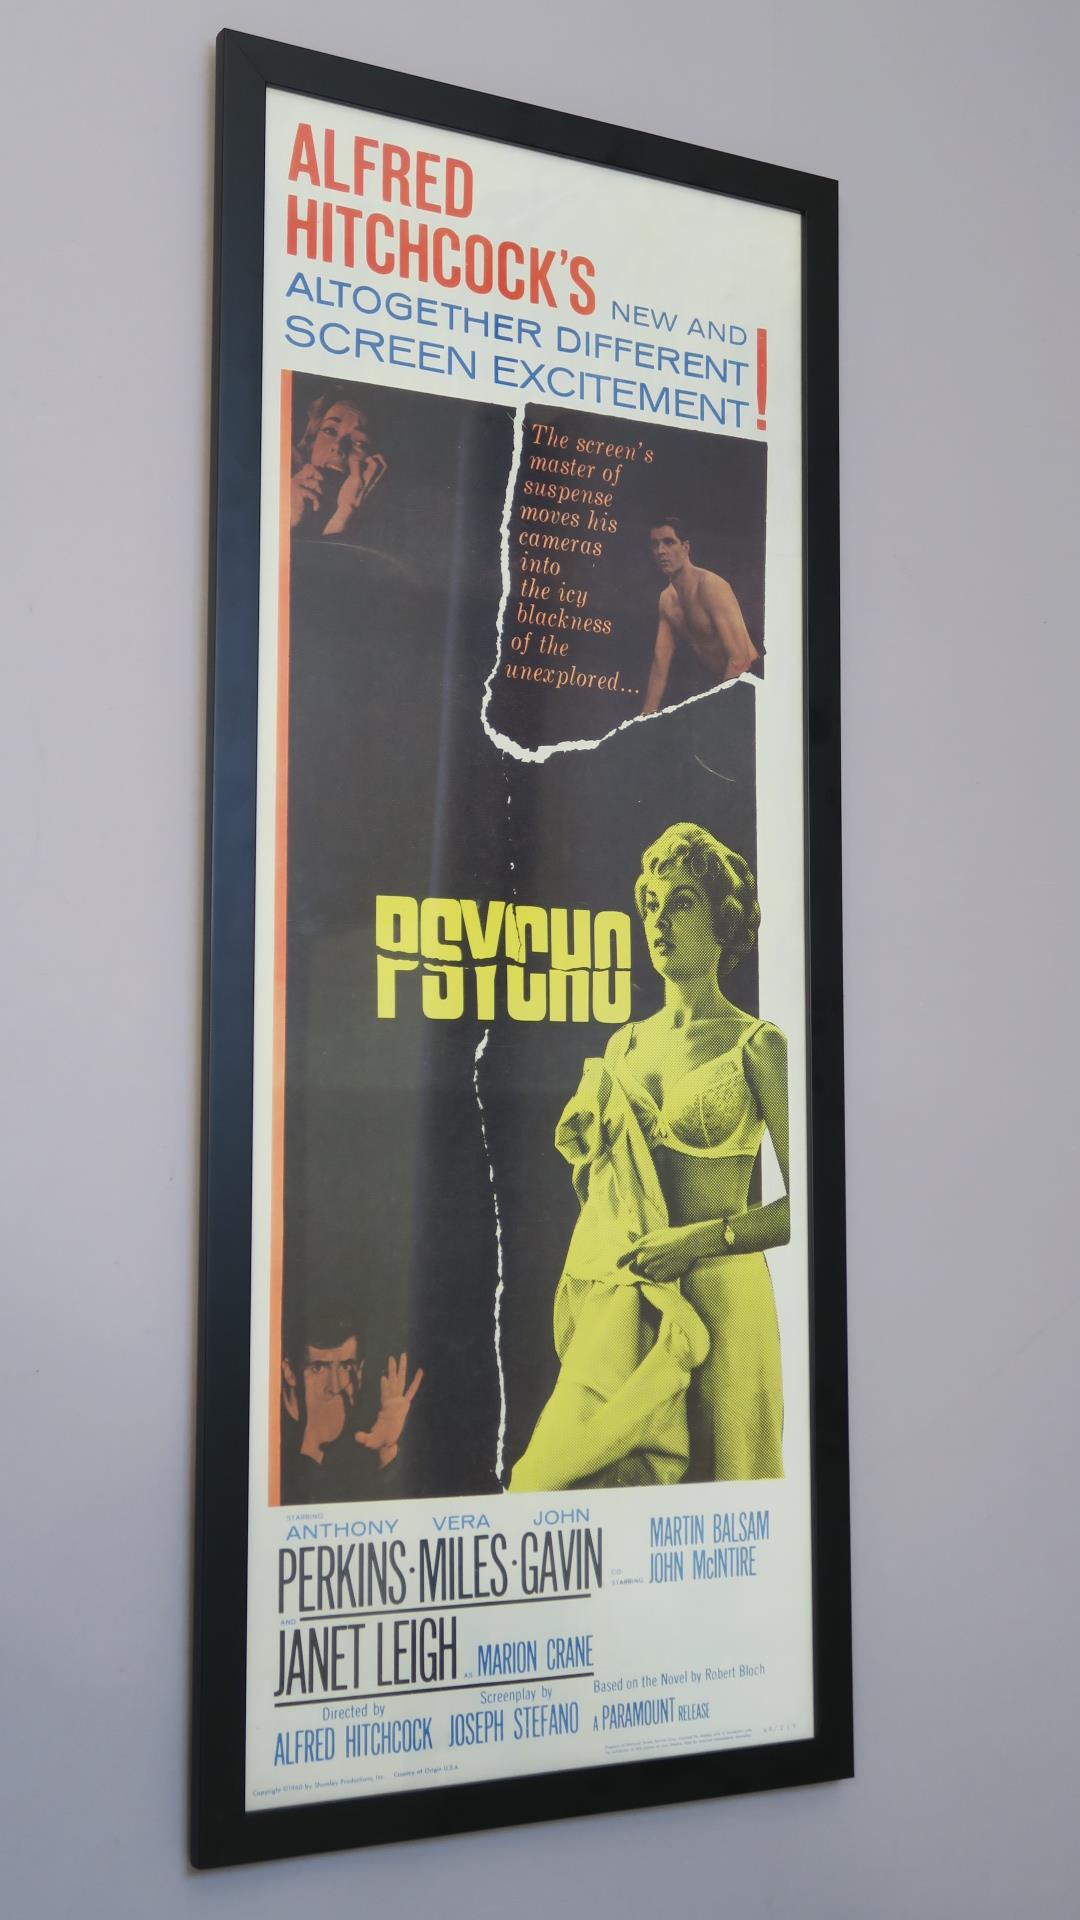 Psycho (1960) original US insert film poster for the Alfred Hitchcock classic starring Anthony